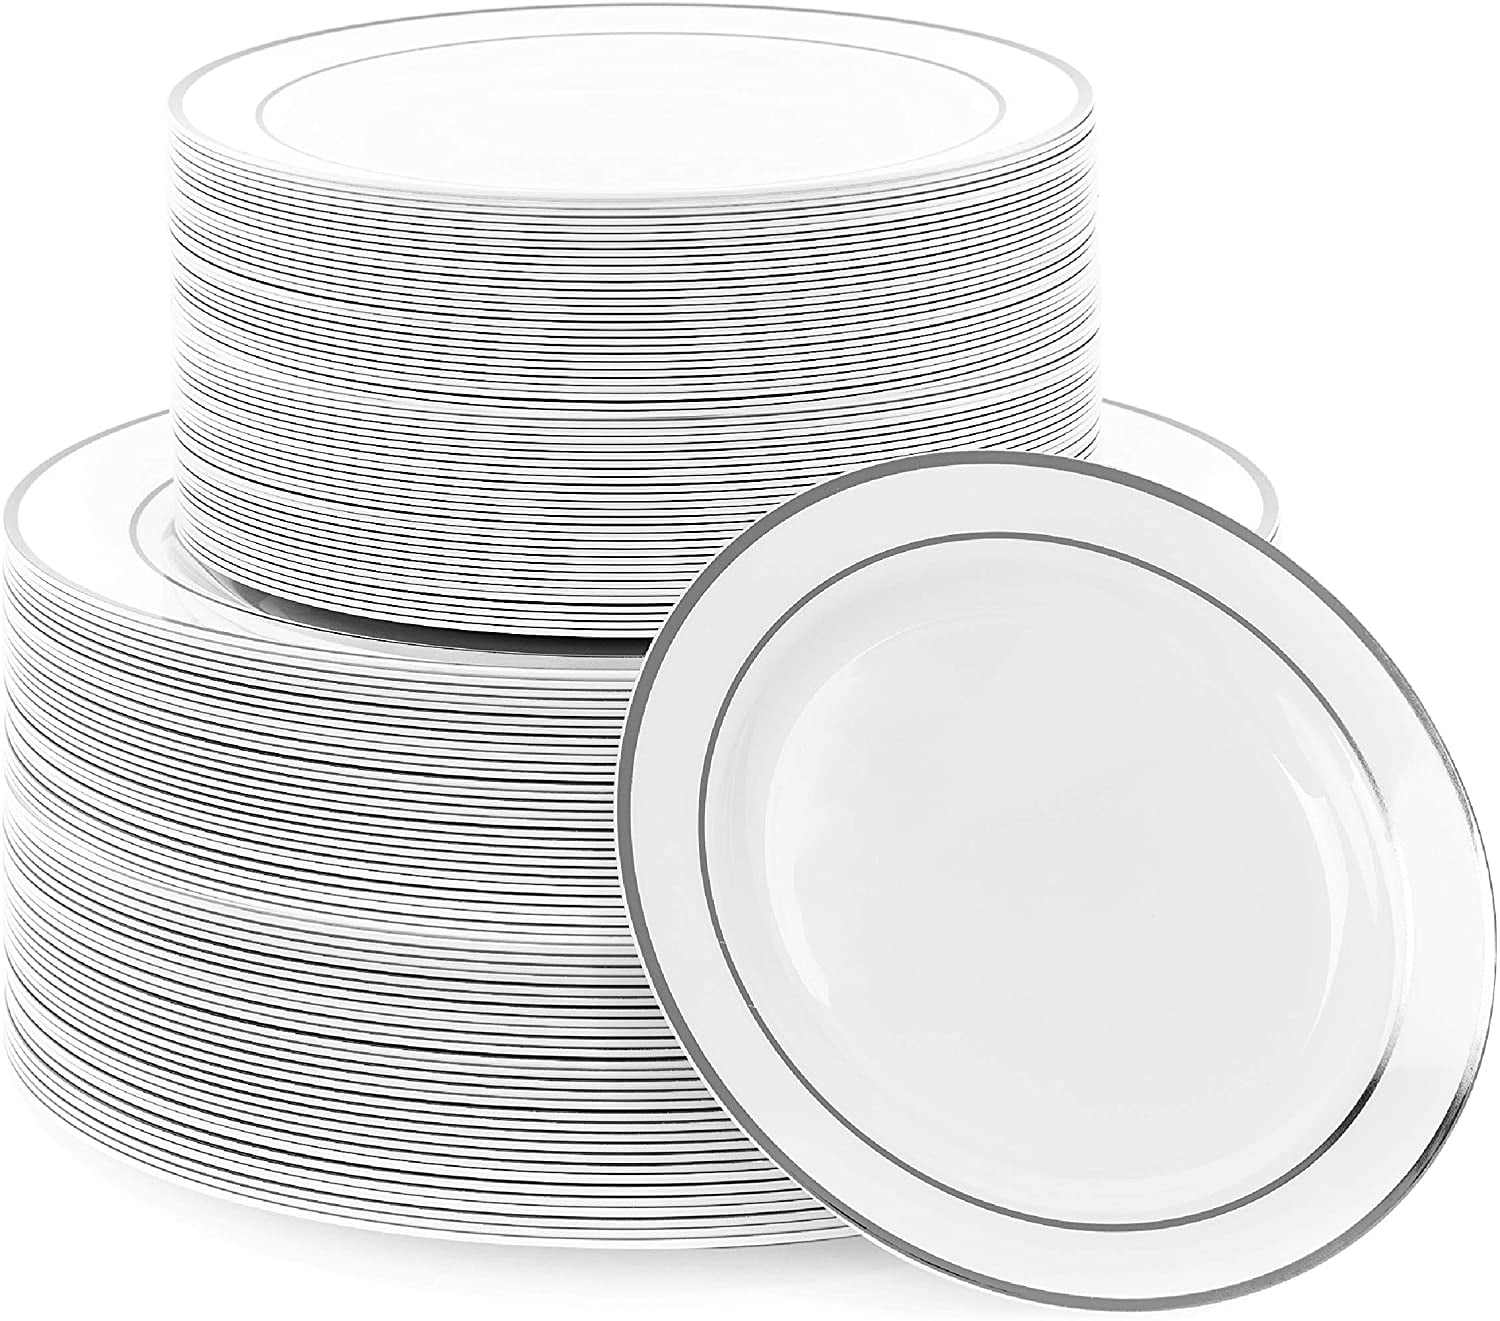 Chinet Plates, All Occasion, Classic White, 8.75 Inch, Plates